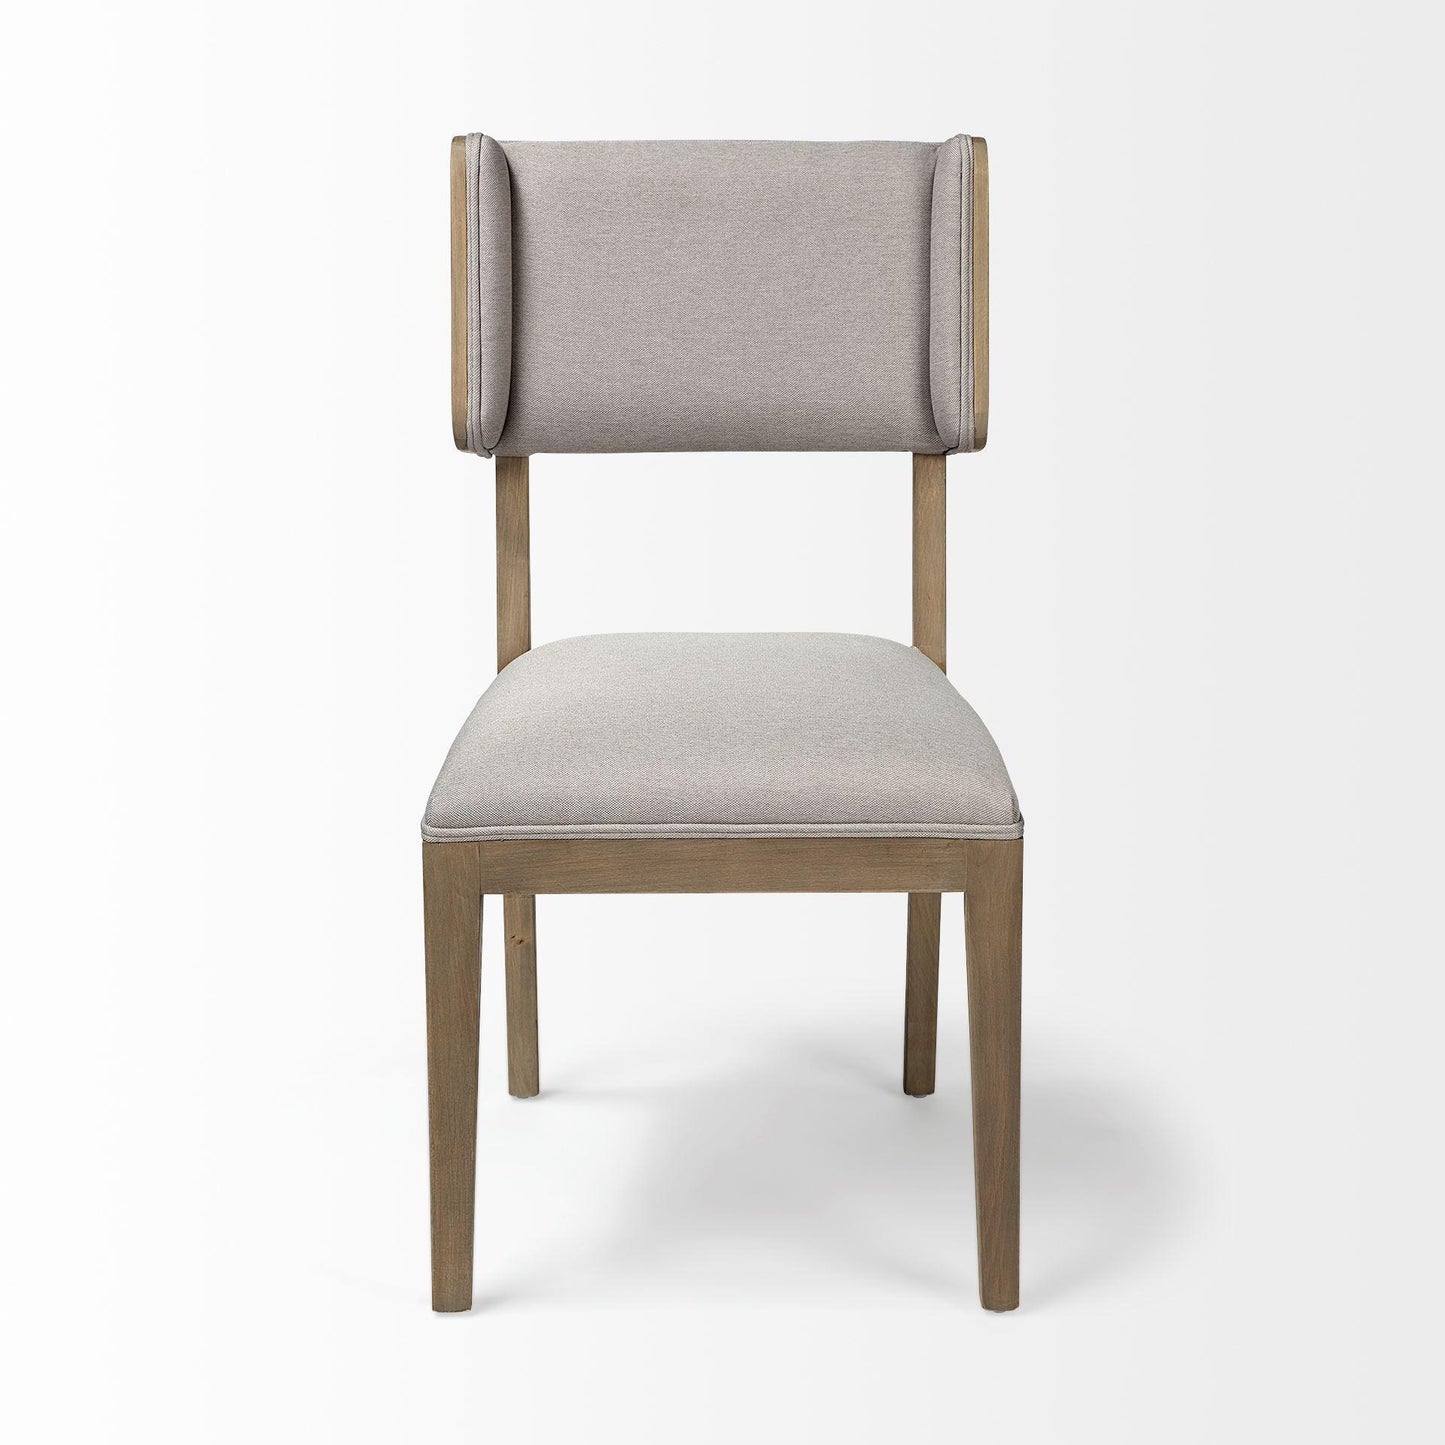 Araxi Table - 6 Chairs